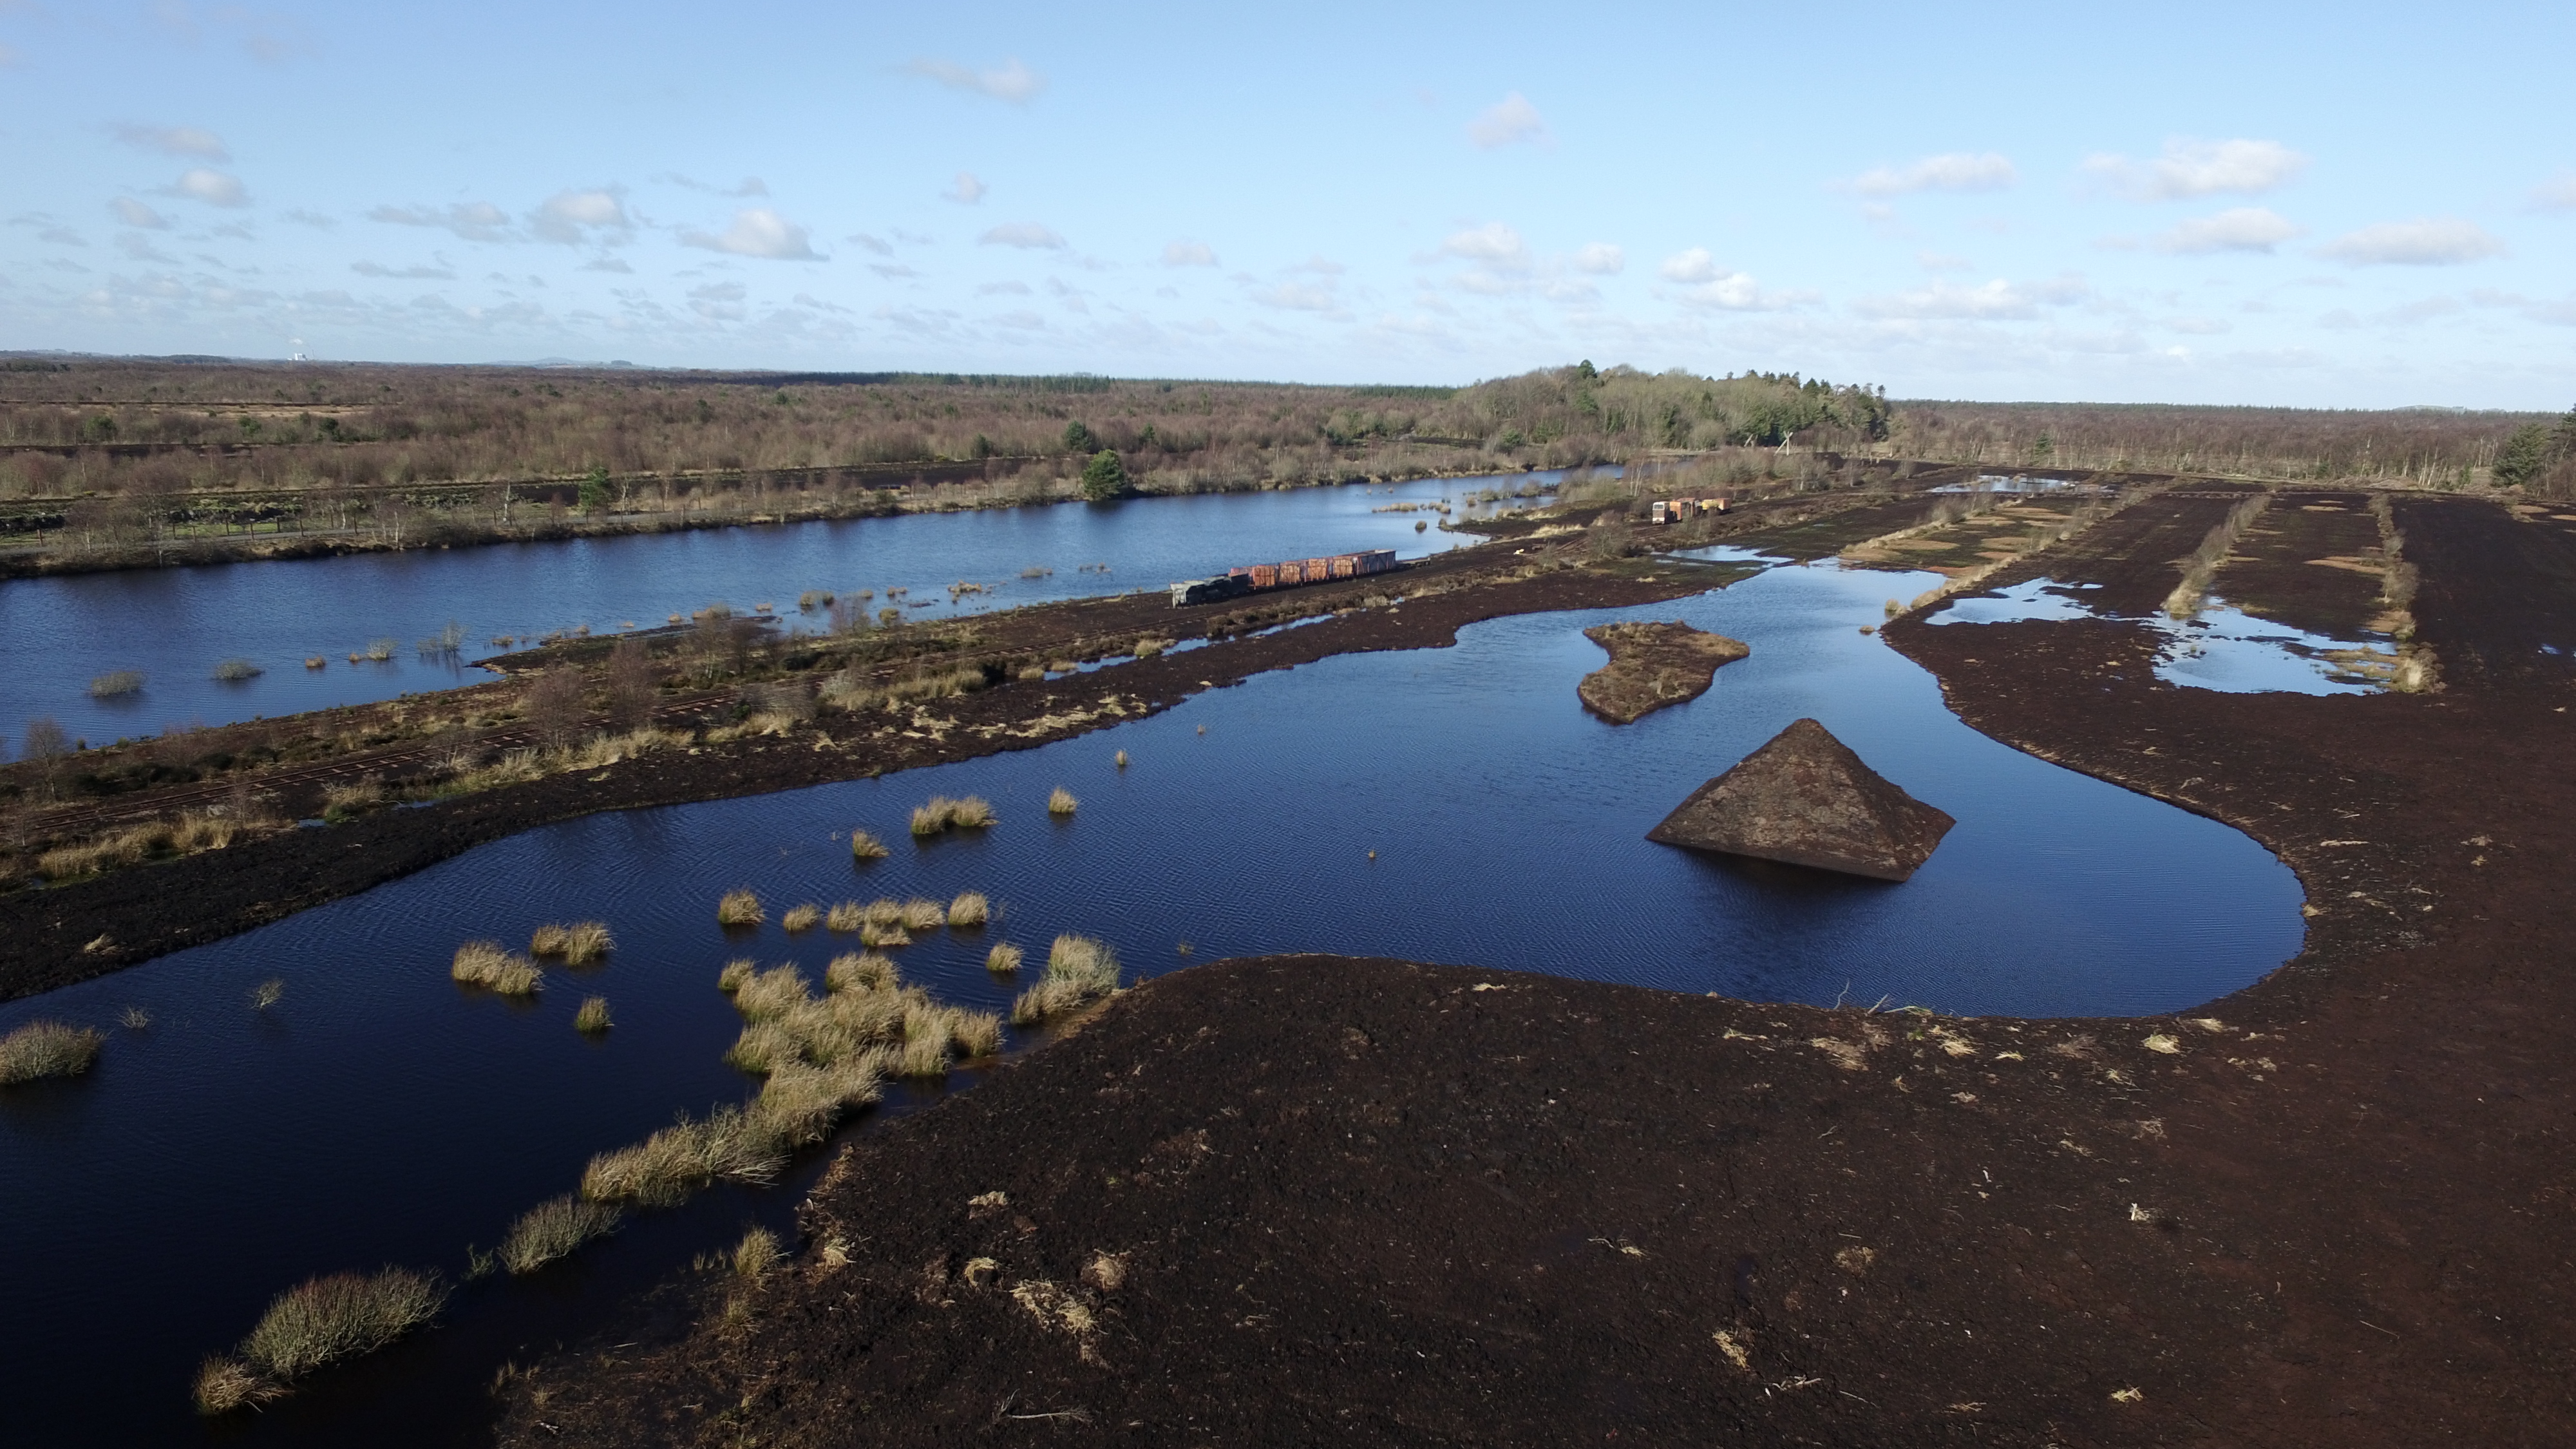 Peatlands from above